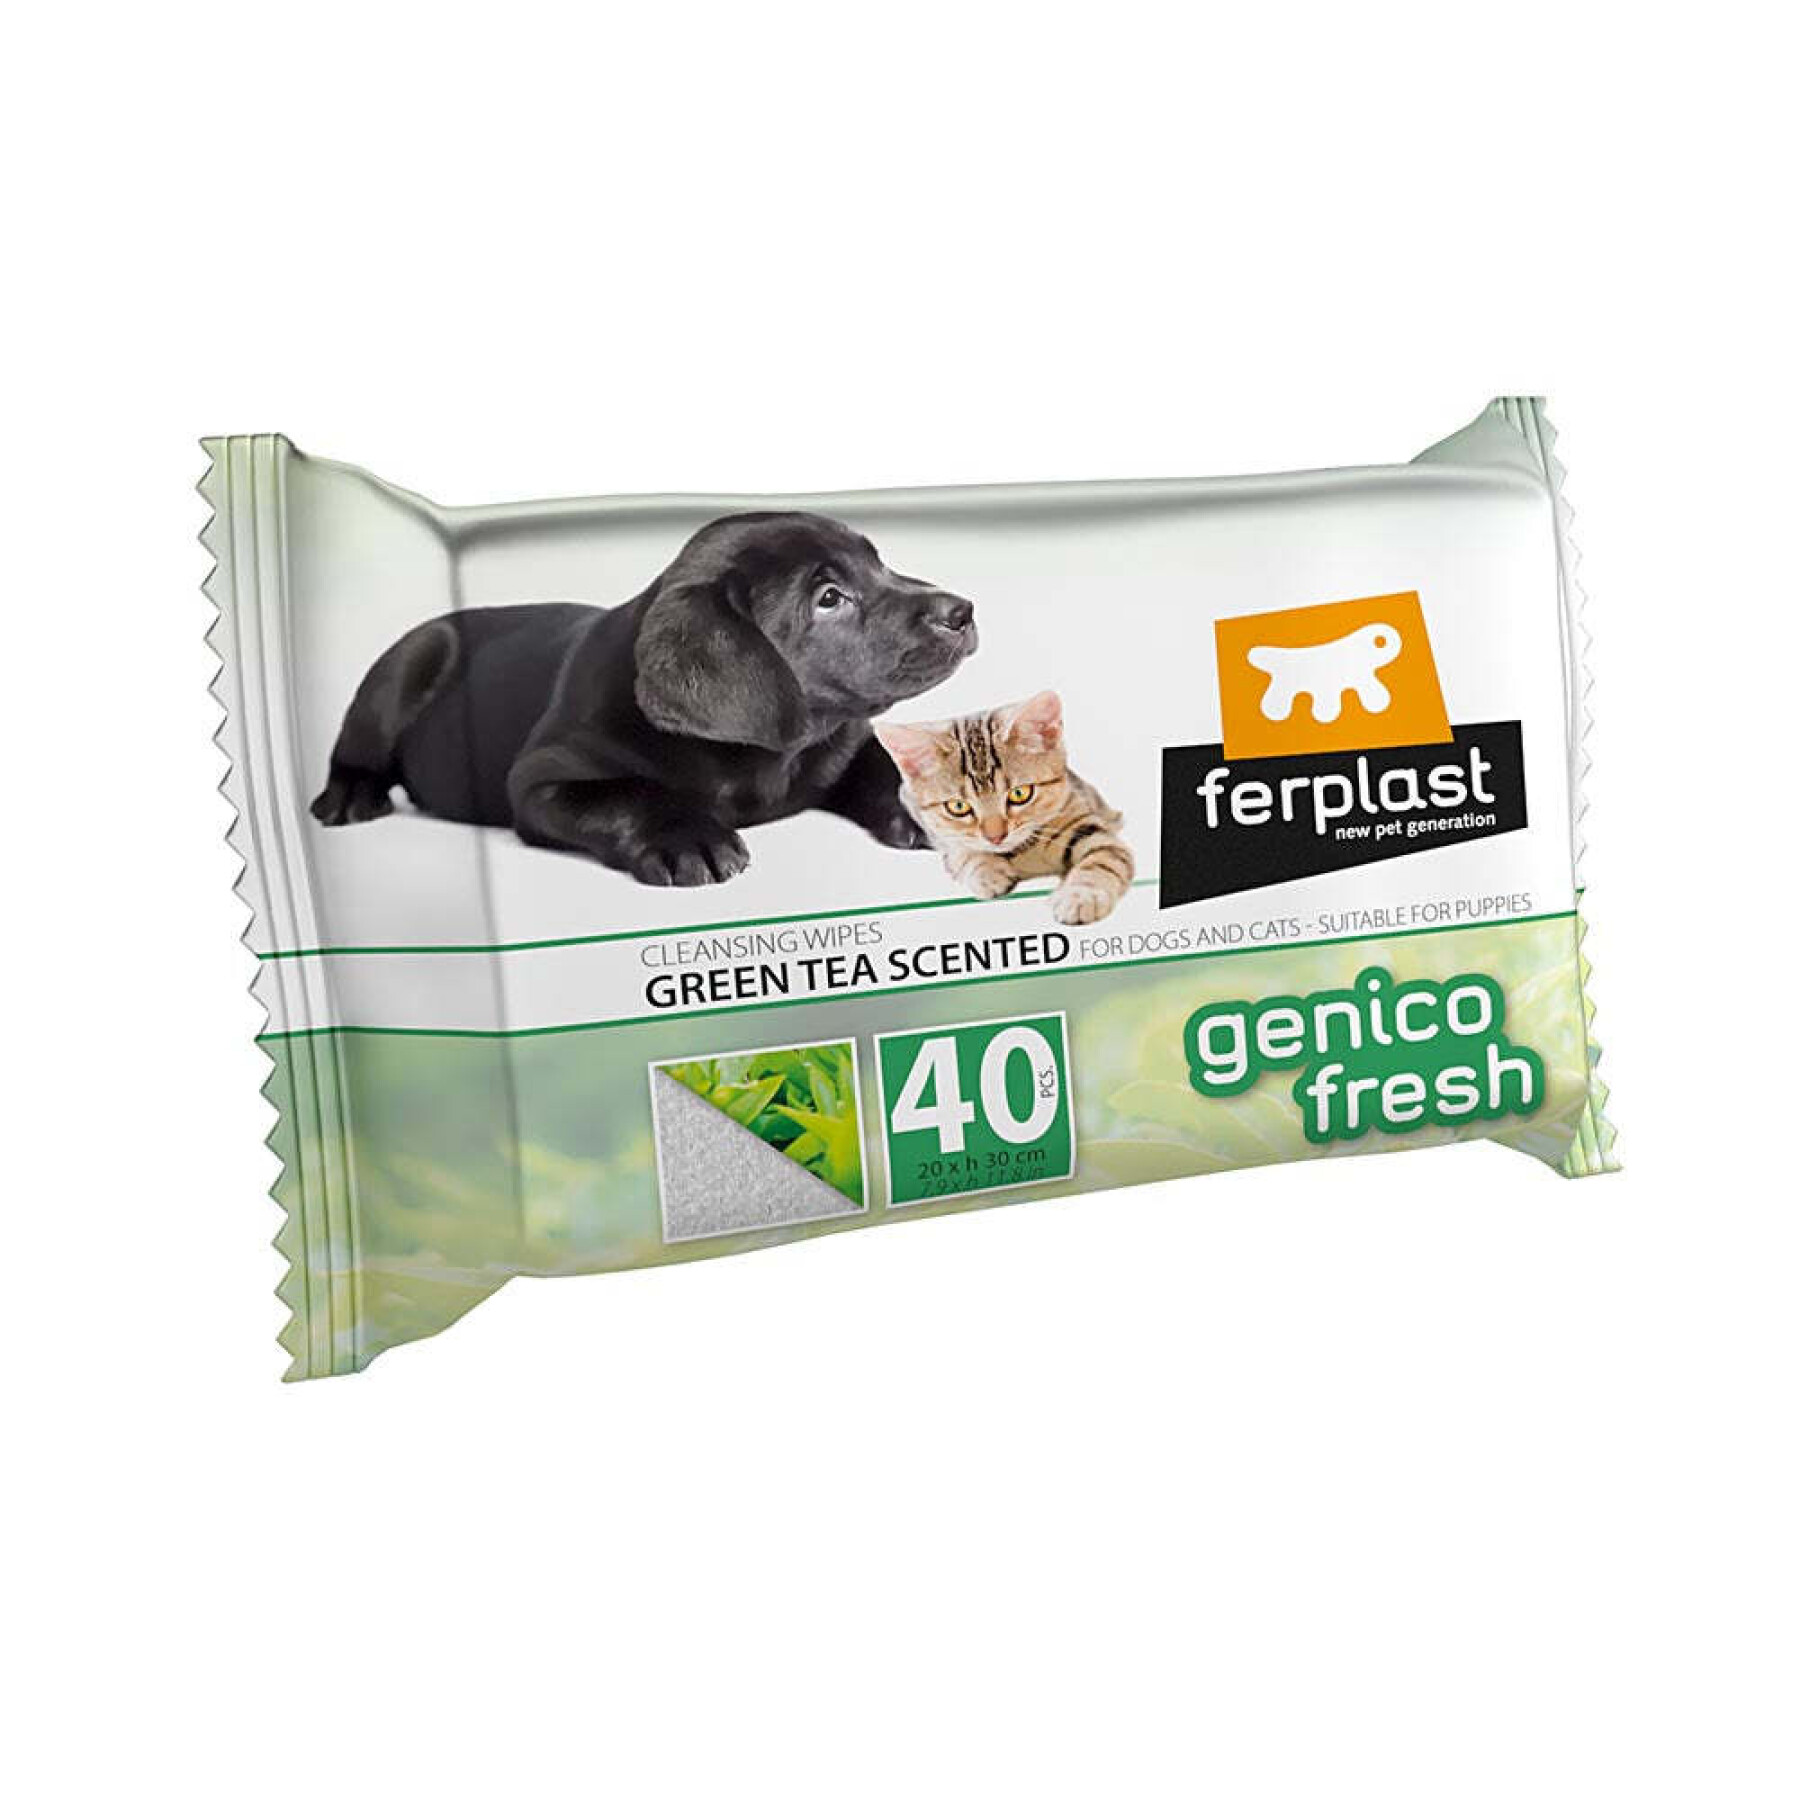 Cleansing wipes for dogs and cats tea Ferplast Genico Fresh (x40)